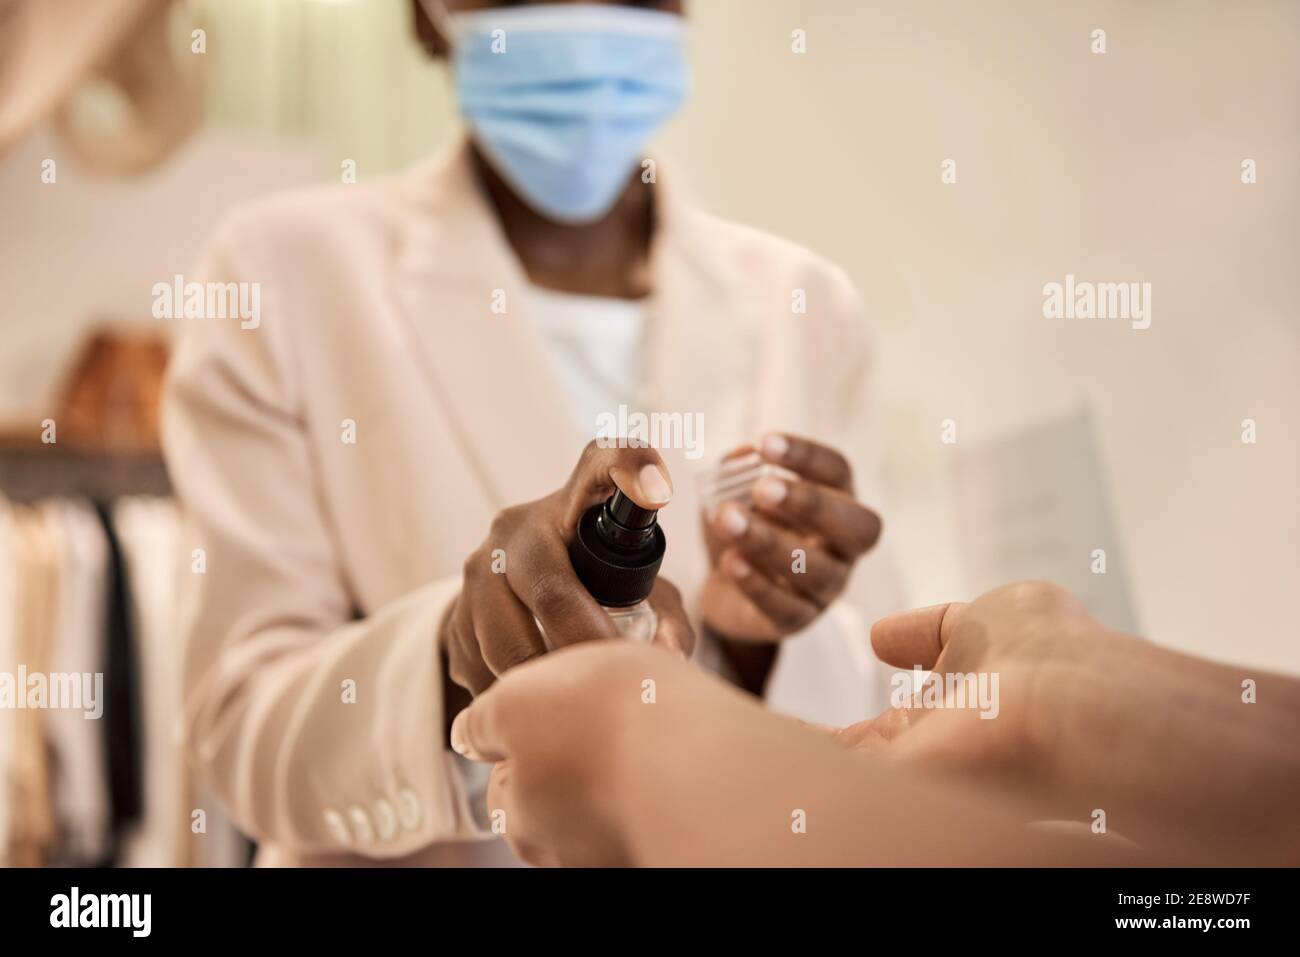 African American boutique owner spraying sanitizer on a customer's hands Stock Photo